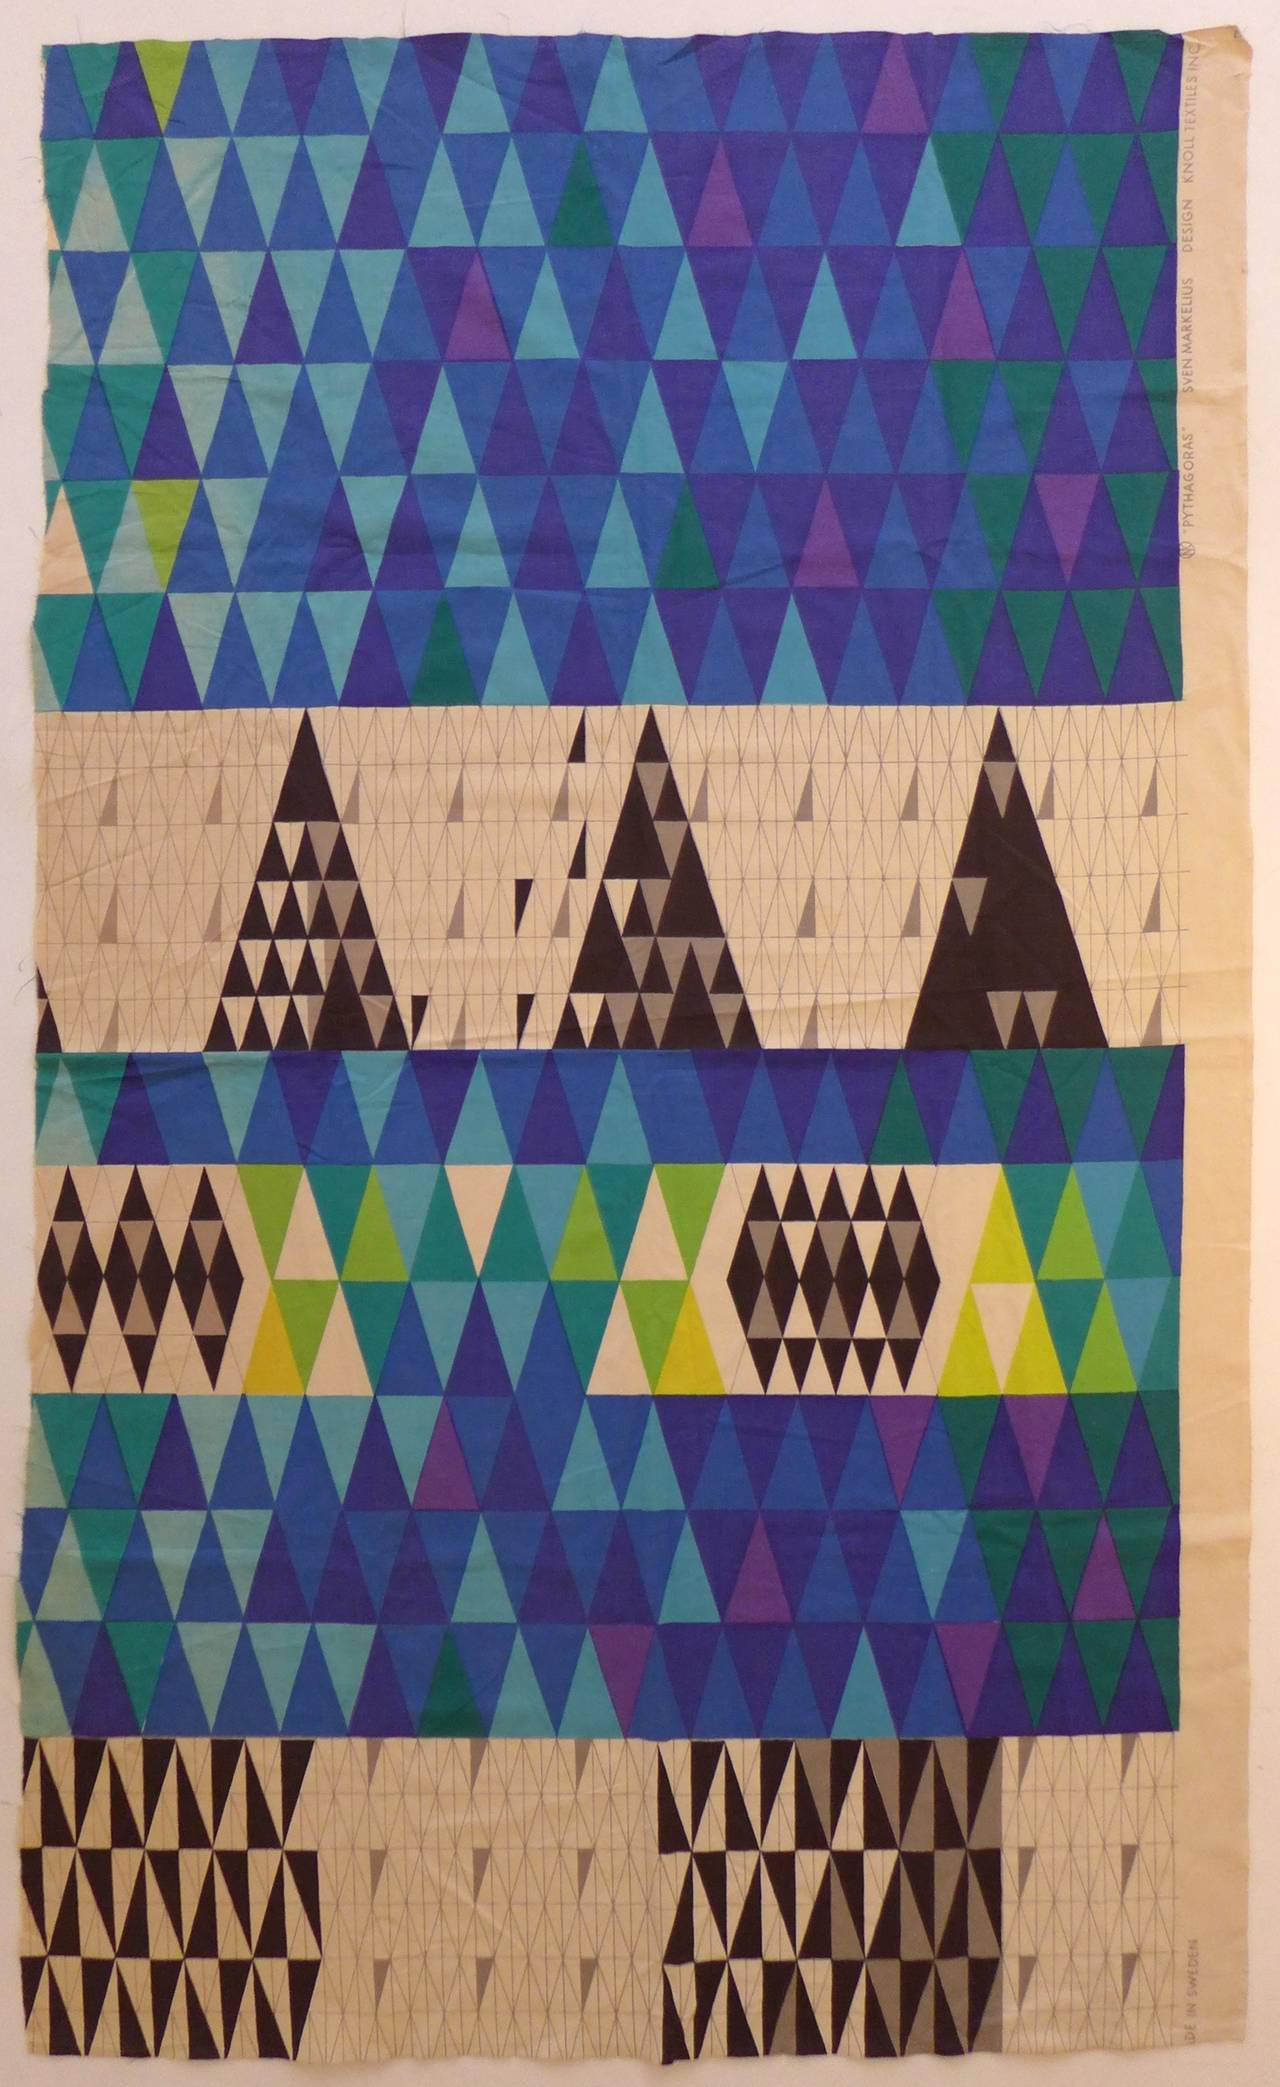 Large swatch of screen-printed fabric with a complex geometric pattern, titled 